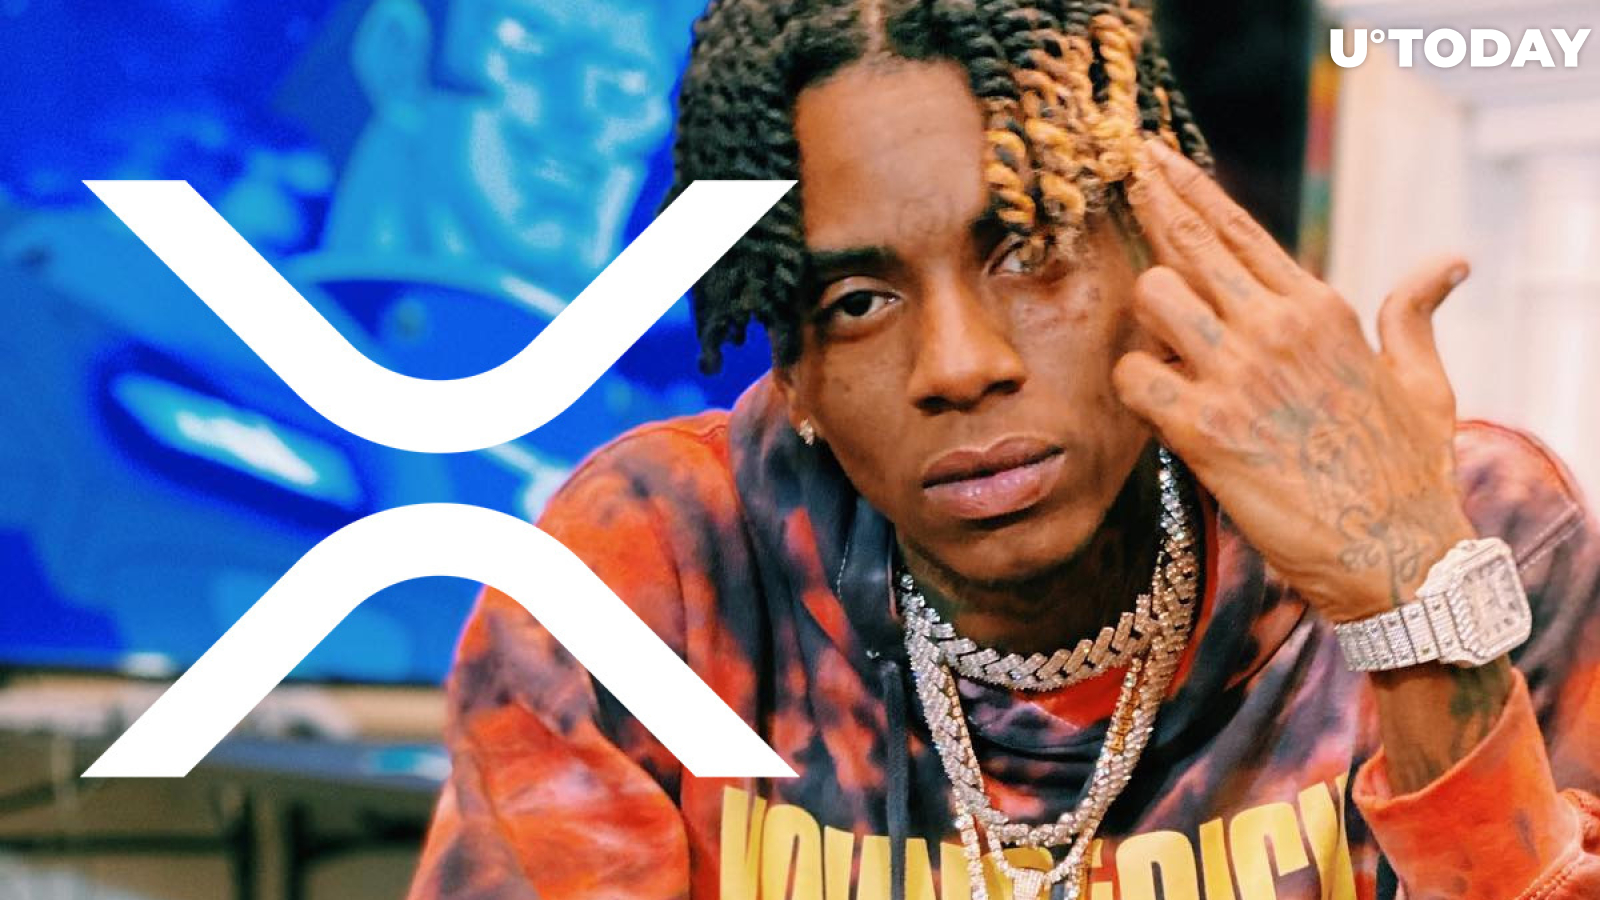 Rapper Soulja Boy Aims to Get XRP and Already Holds Bitcoin